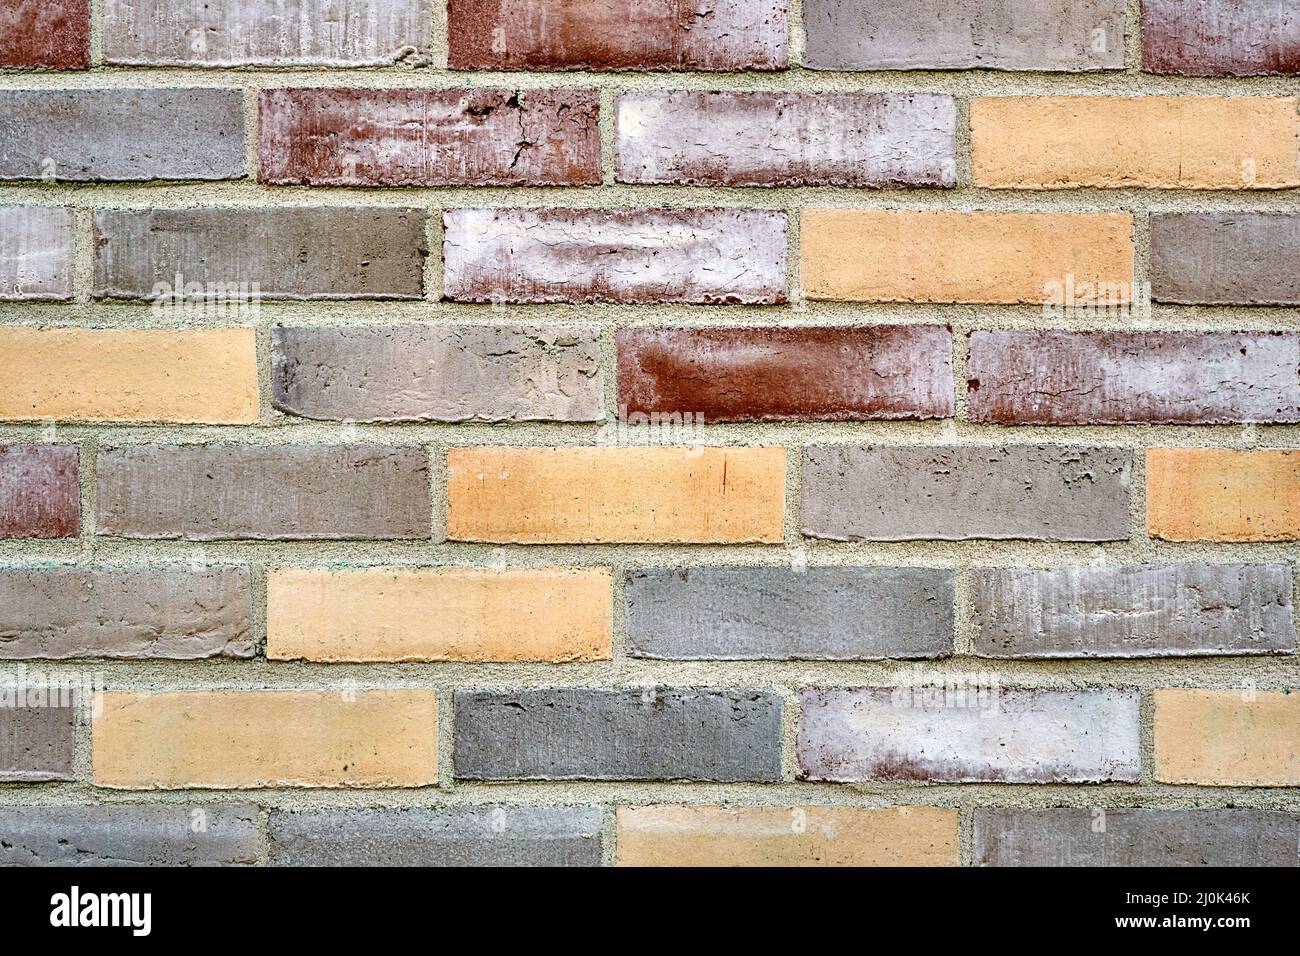 Background from a multicolored brick wall Stock Photo